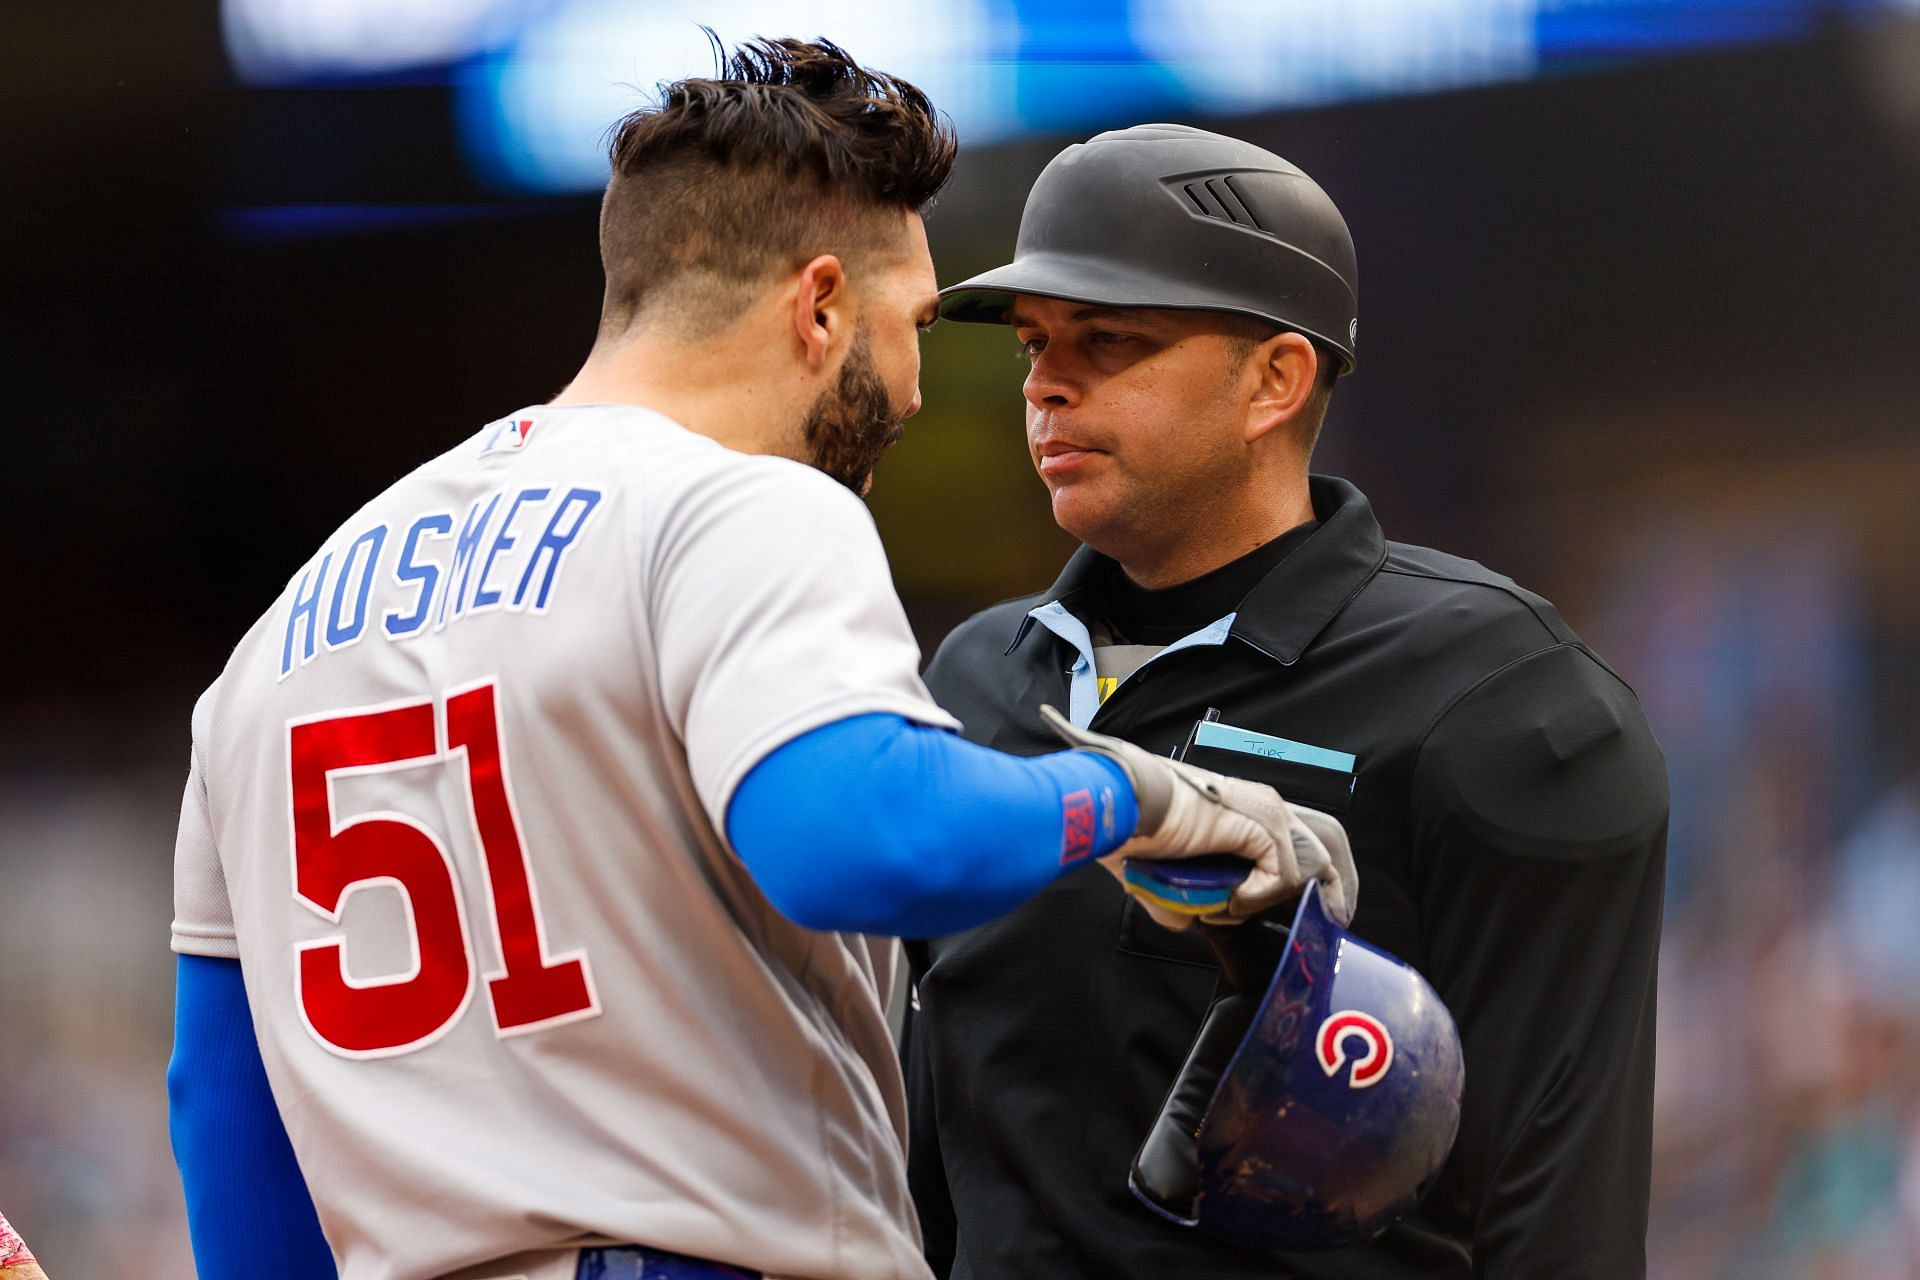 Eric Hosmer #51 of the Chicago Cubs argues a third strike with umpire Edwin Jimenez